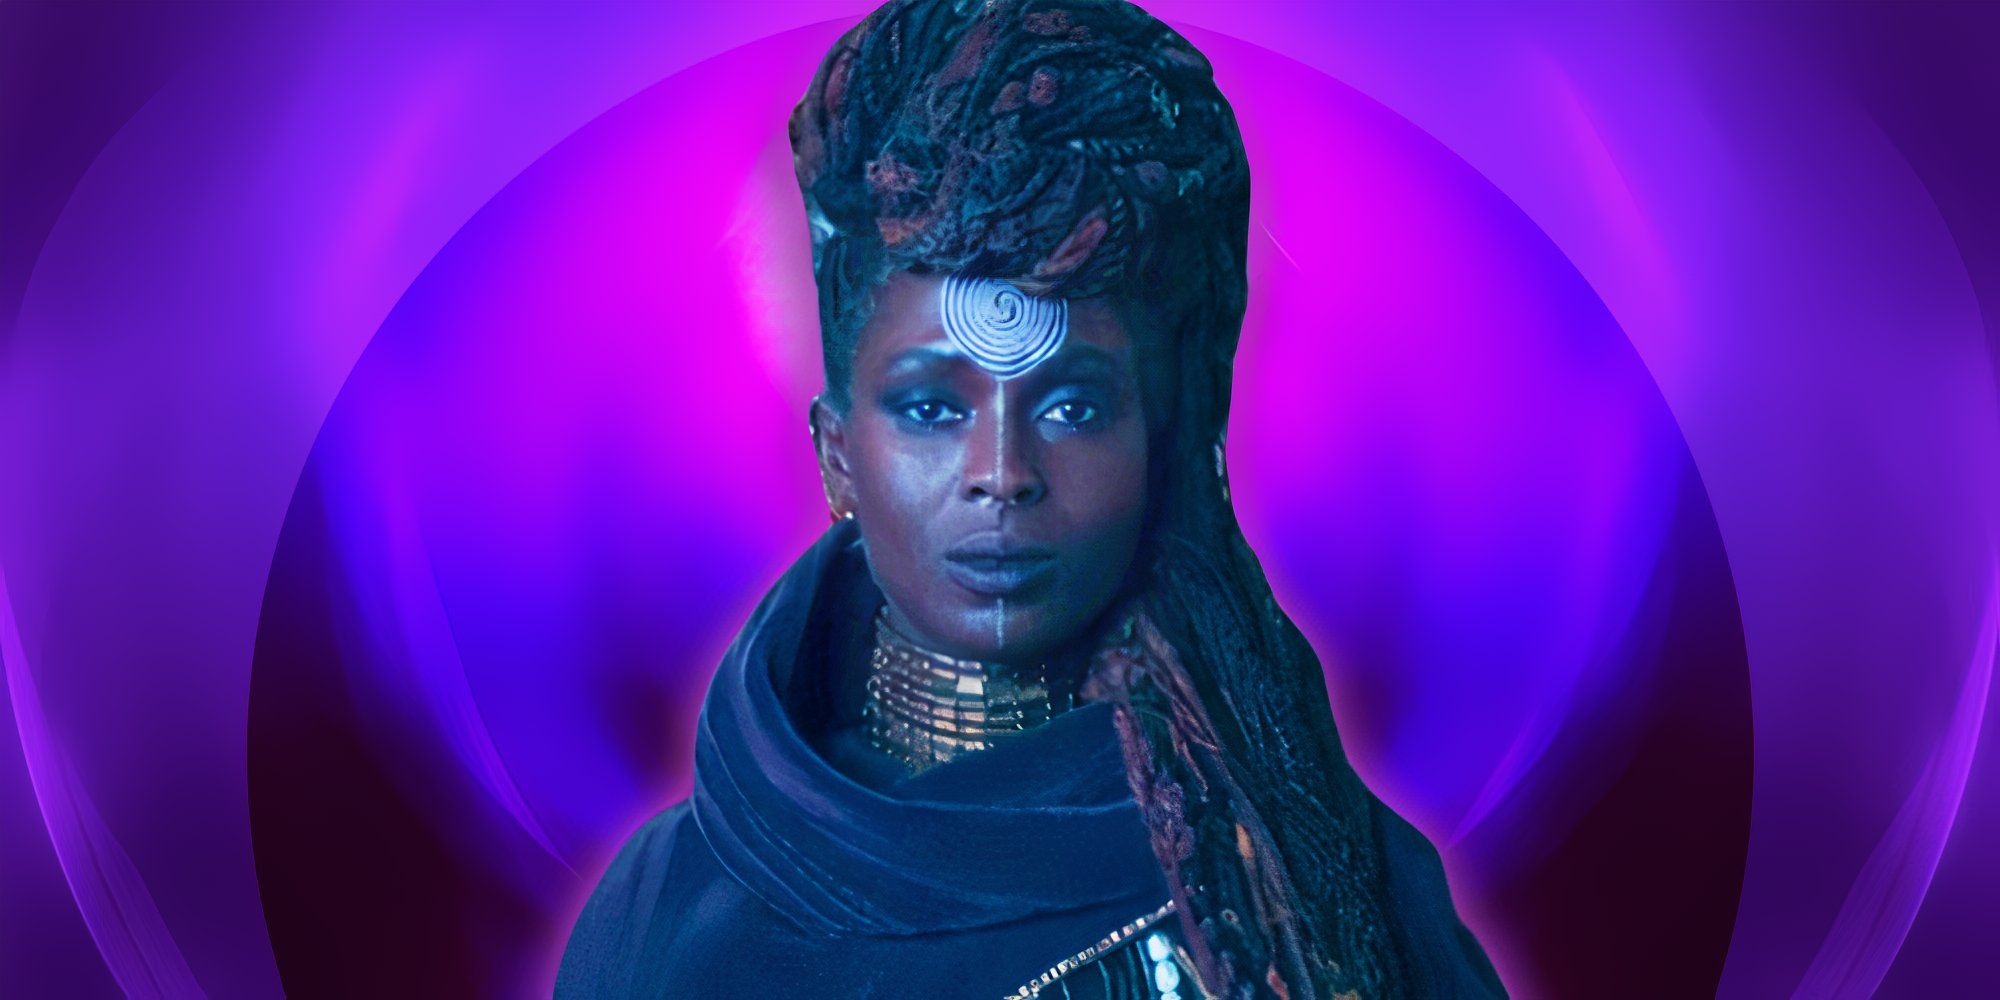 Jodie Turner-Smith as Mother Aniseya in The Acolyte, edited over a pink and purple background